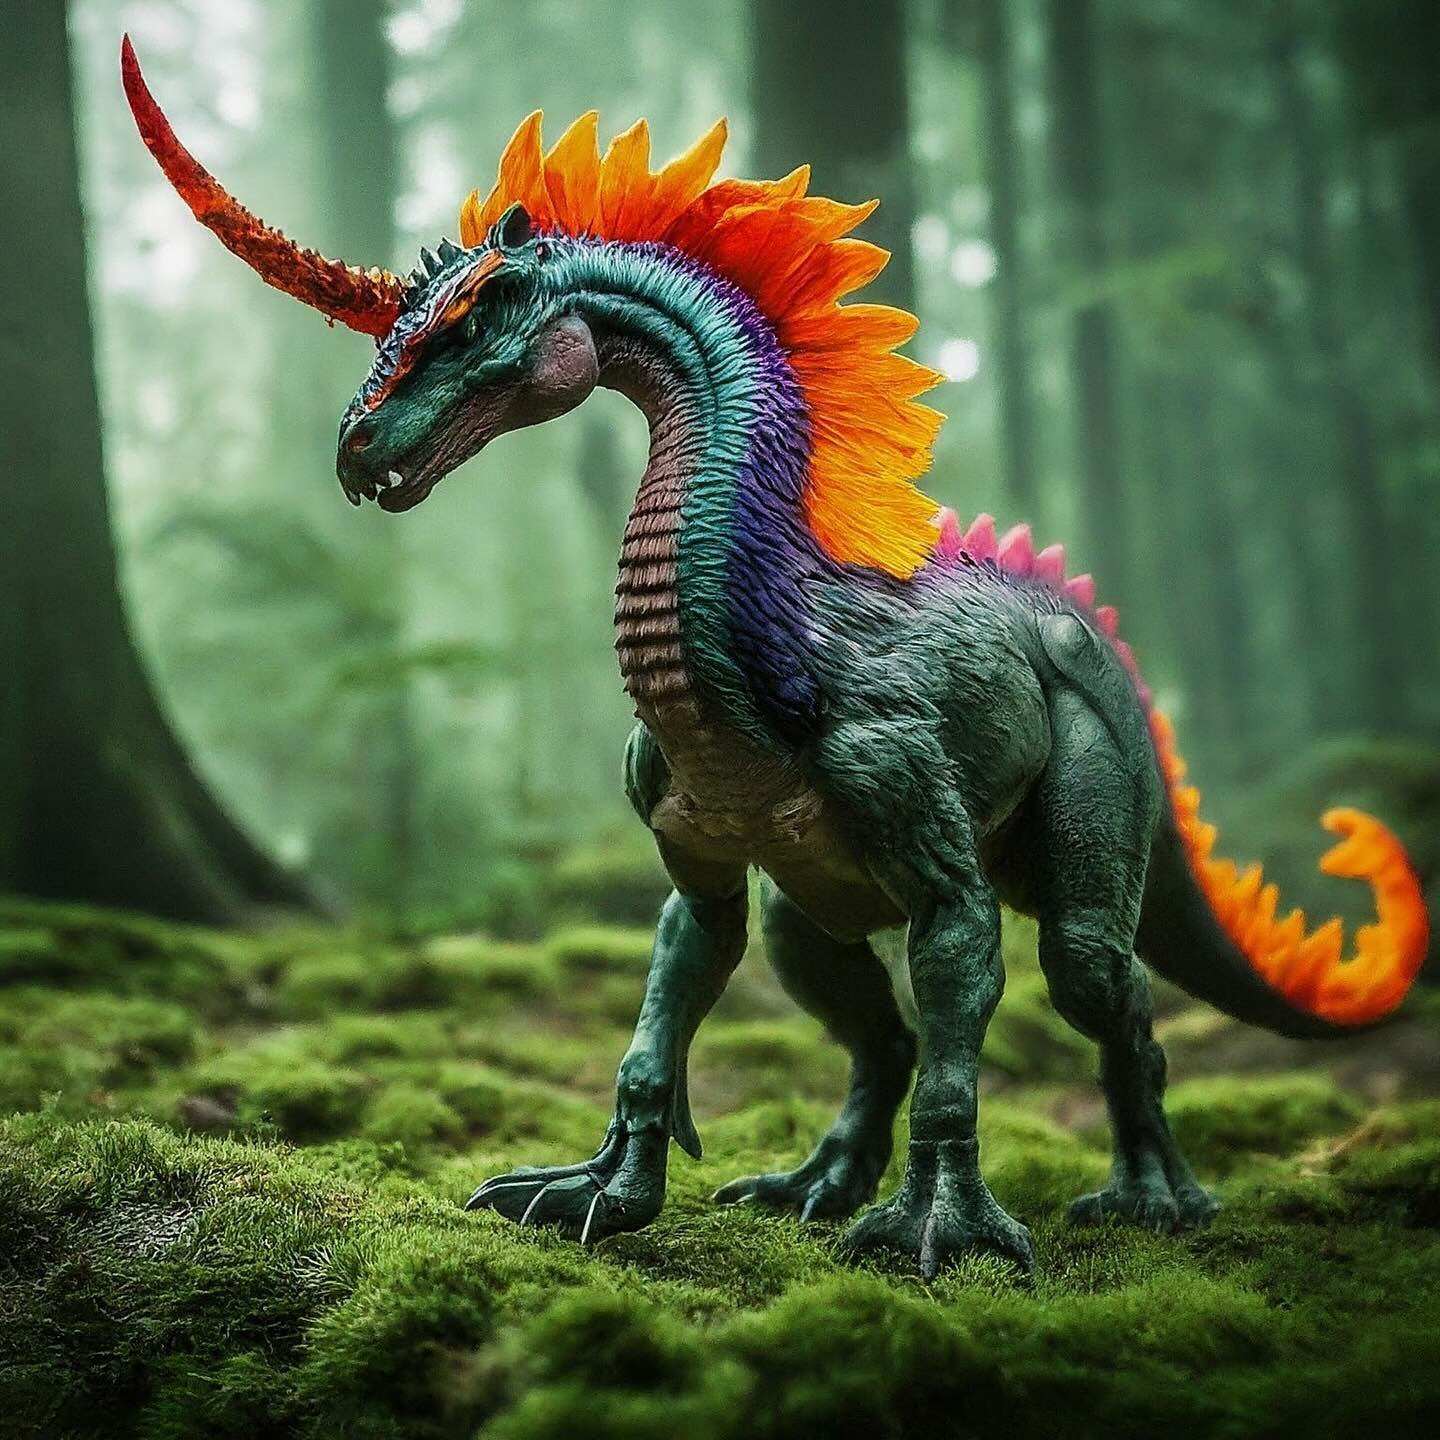 Just polling some folks&hellip; do we prefer unicorn dinosaur, or dinosaur unicorn???? Thanks Google Gemini for the images and d @tracytraeger for this insanely cool idea&hellip;